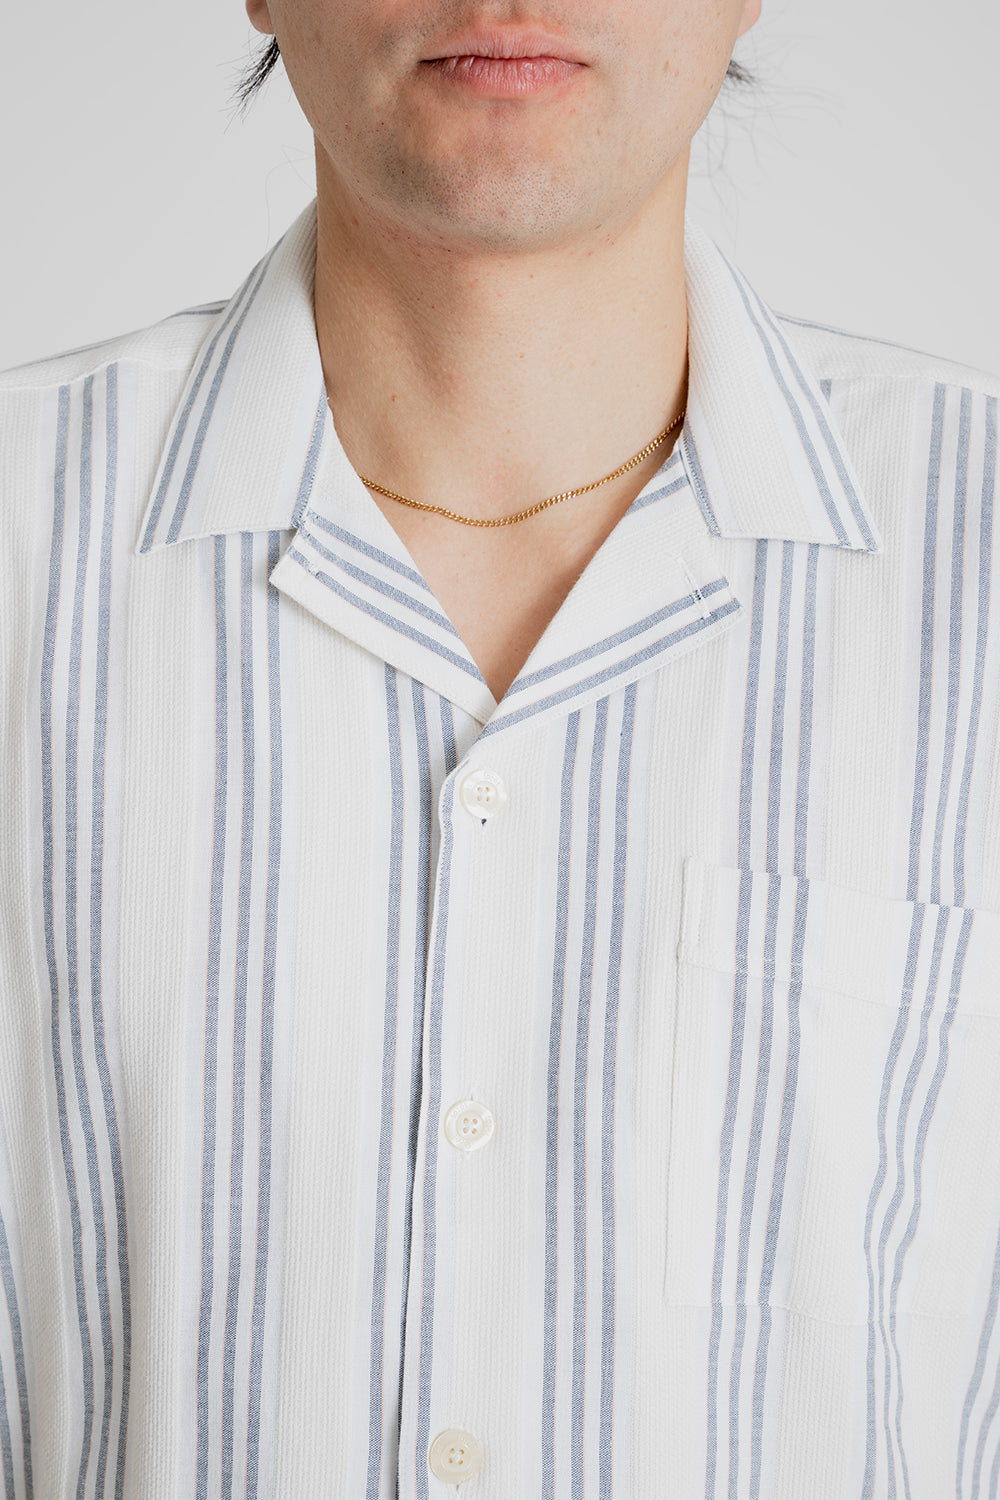 Foret Twig Shirt in Navy and Sandstone